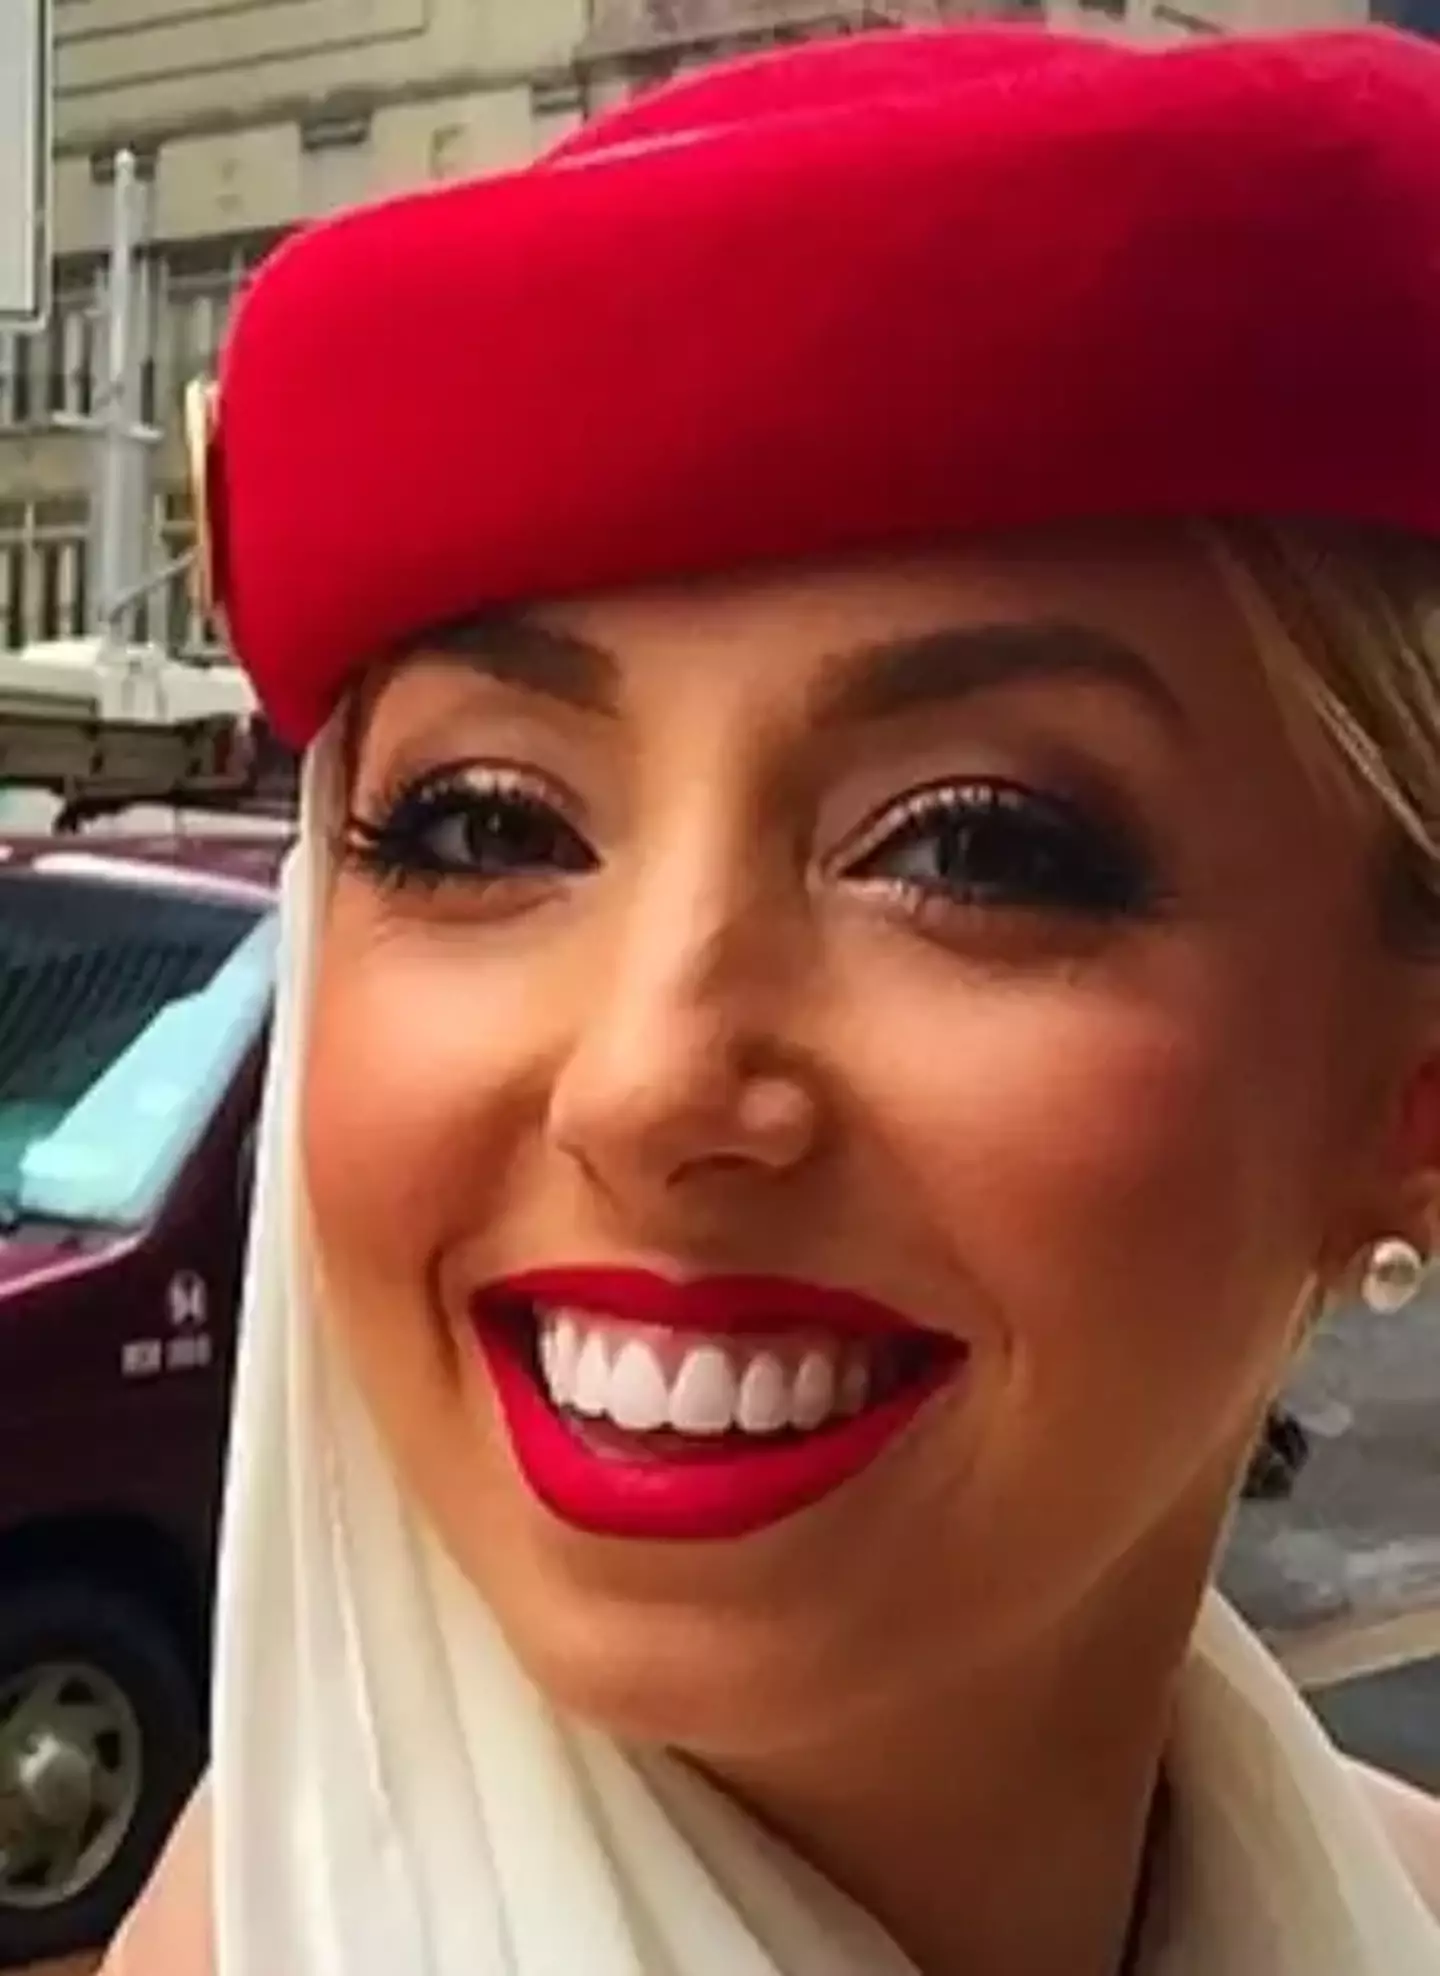 The Emirates flight attendant opened up about how her job paved the way for her 'dream life'.